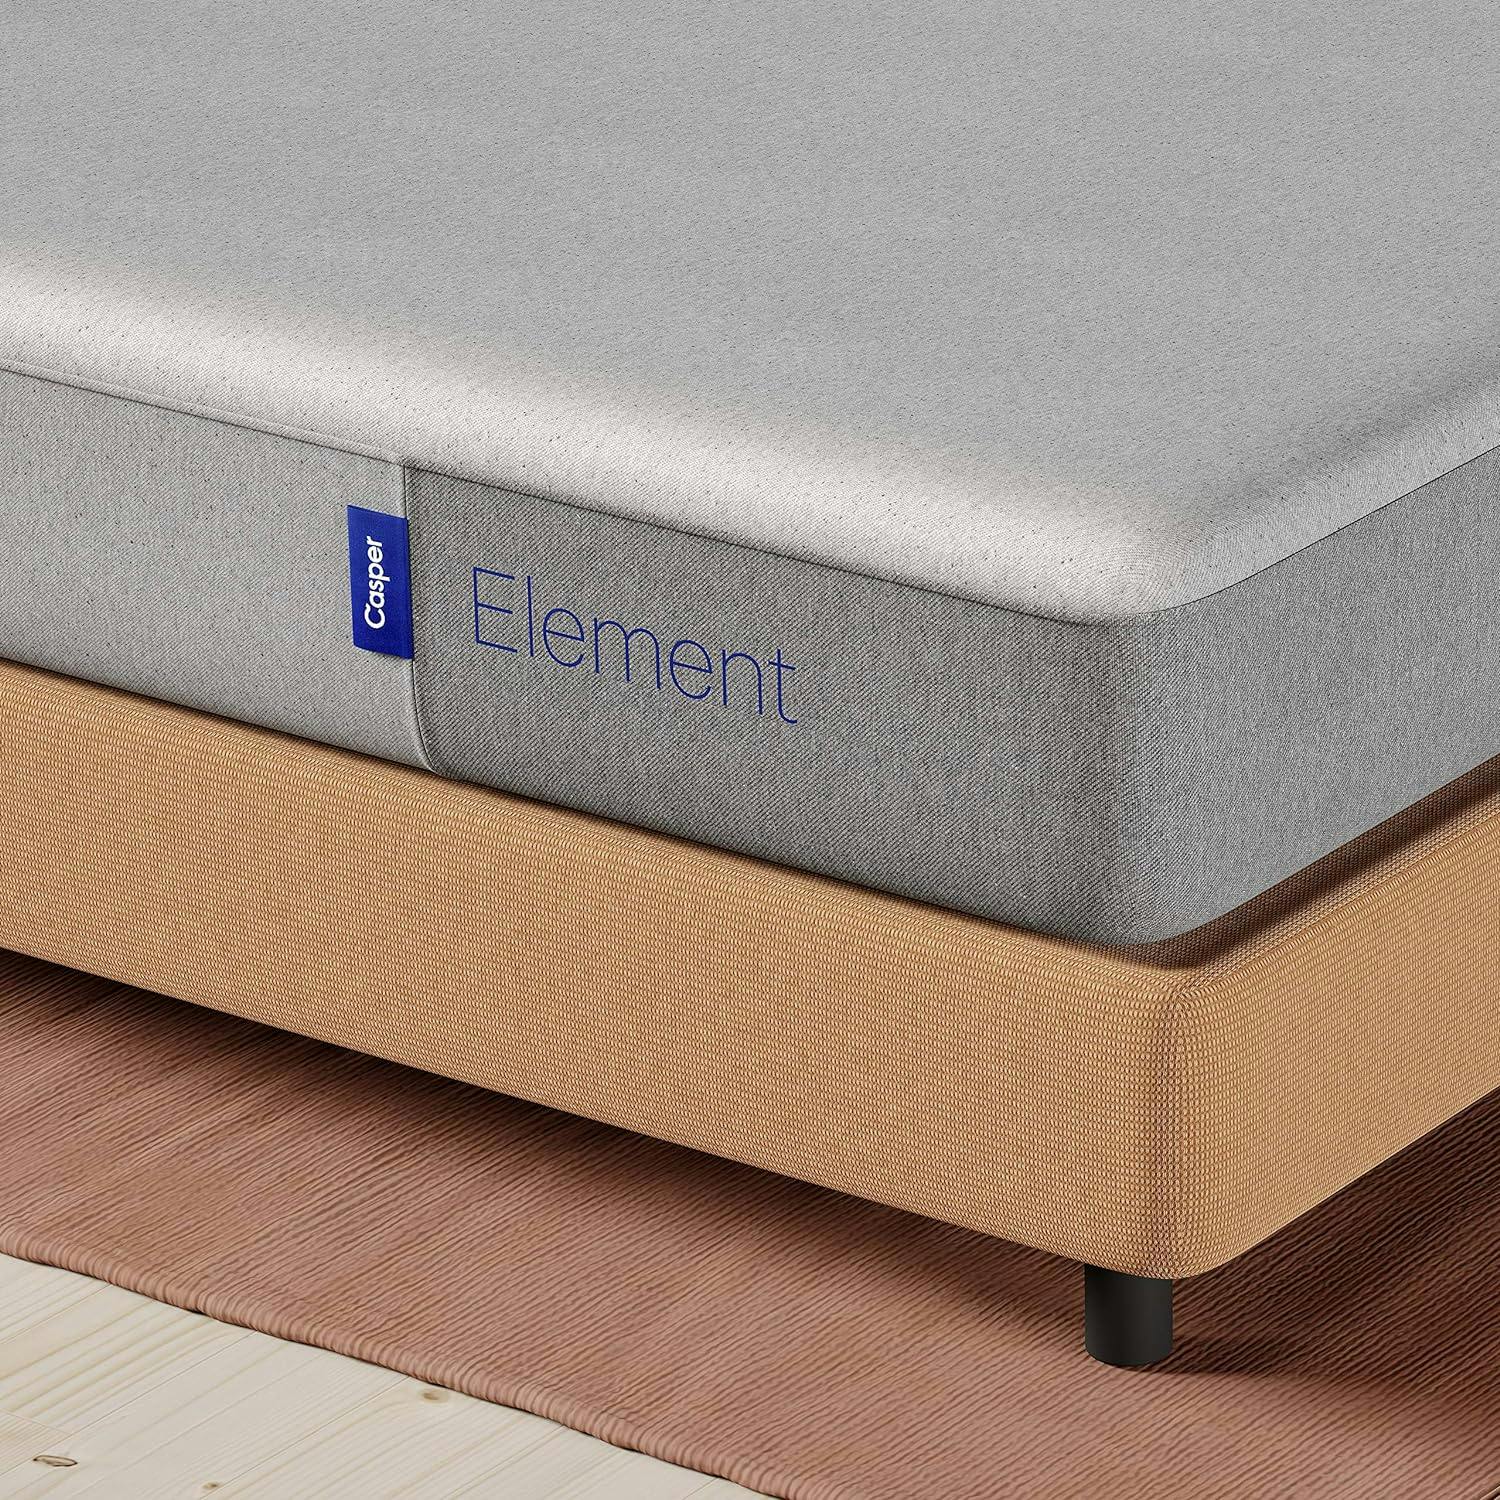 Casper Element Queen Mattress with AirScapeTM Foam and Recycled Cover